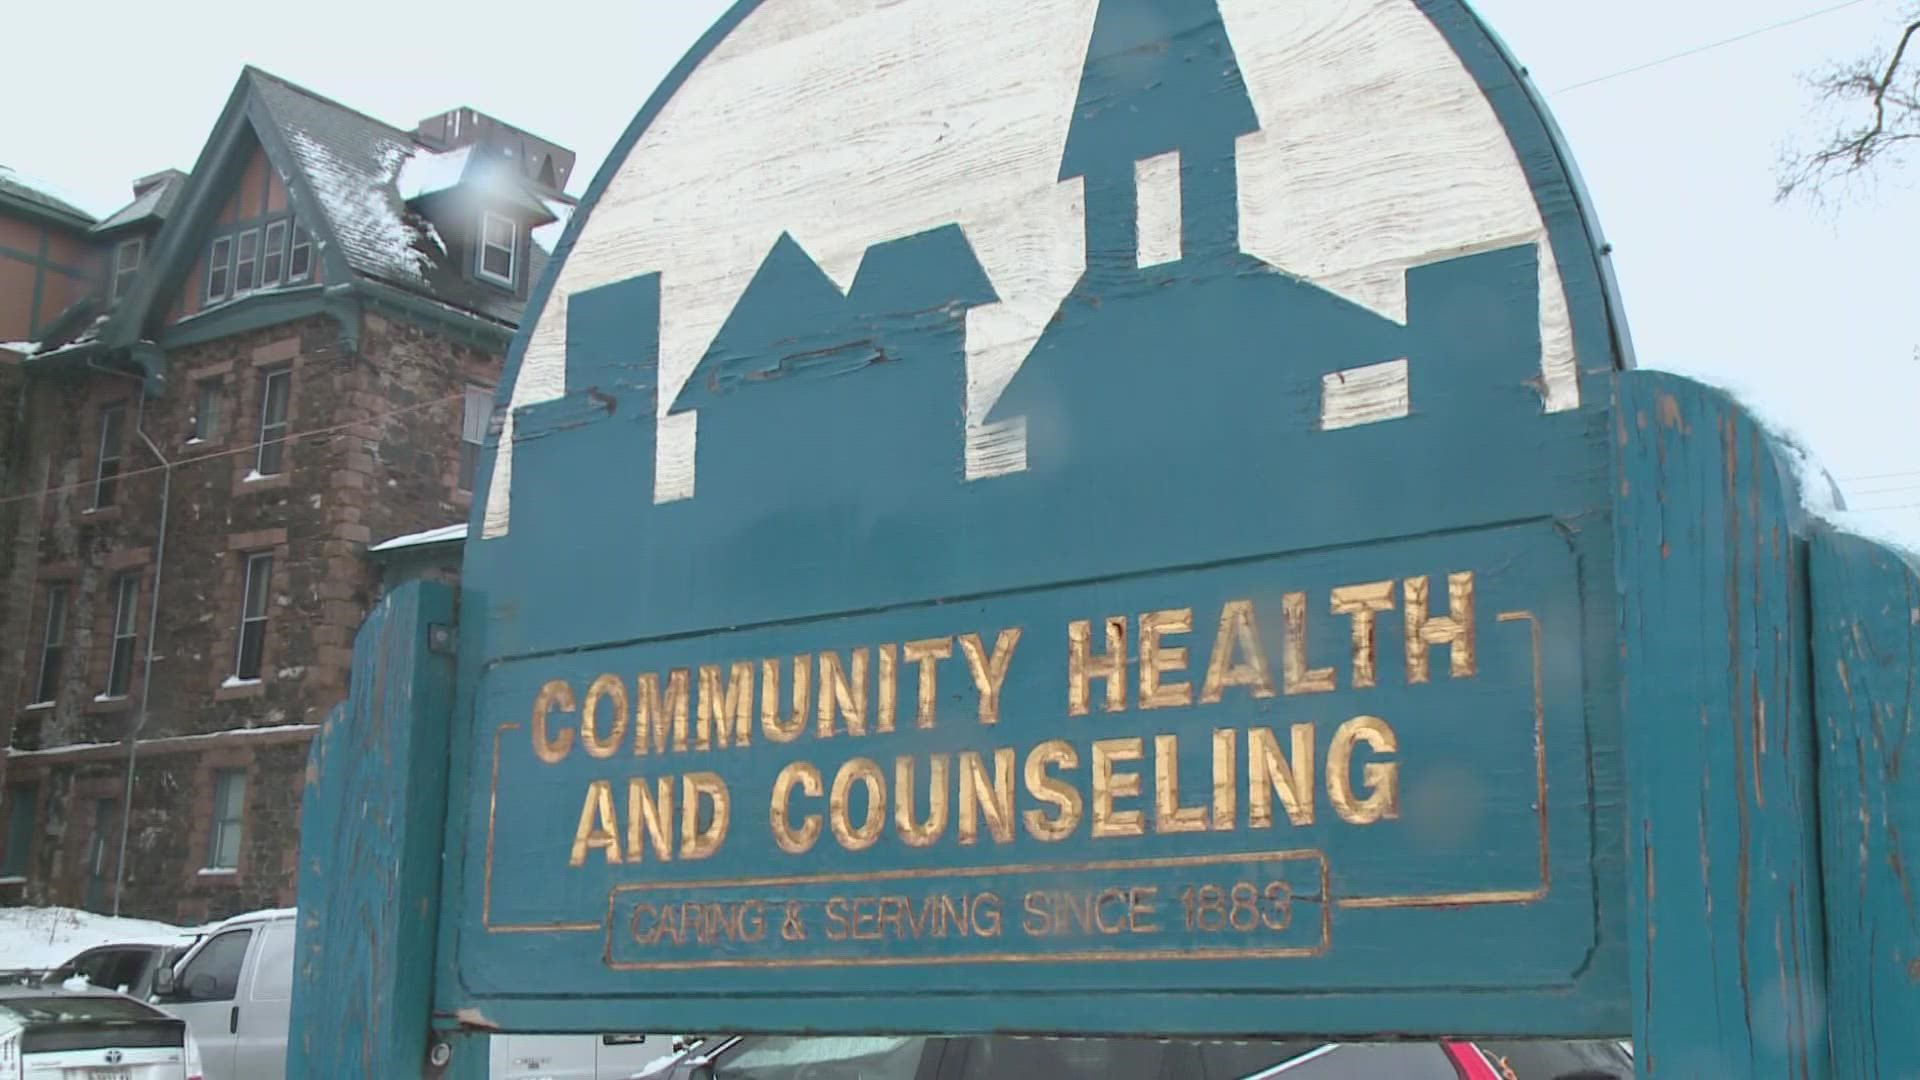 Assertive Community Treatment or ACT Teams provide community-based mental health treatment and services.